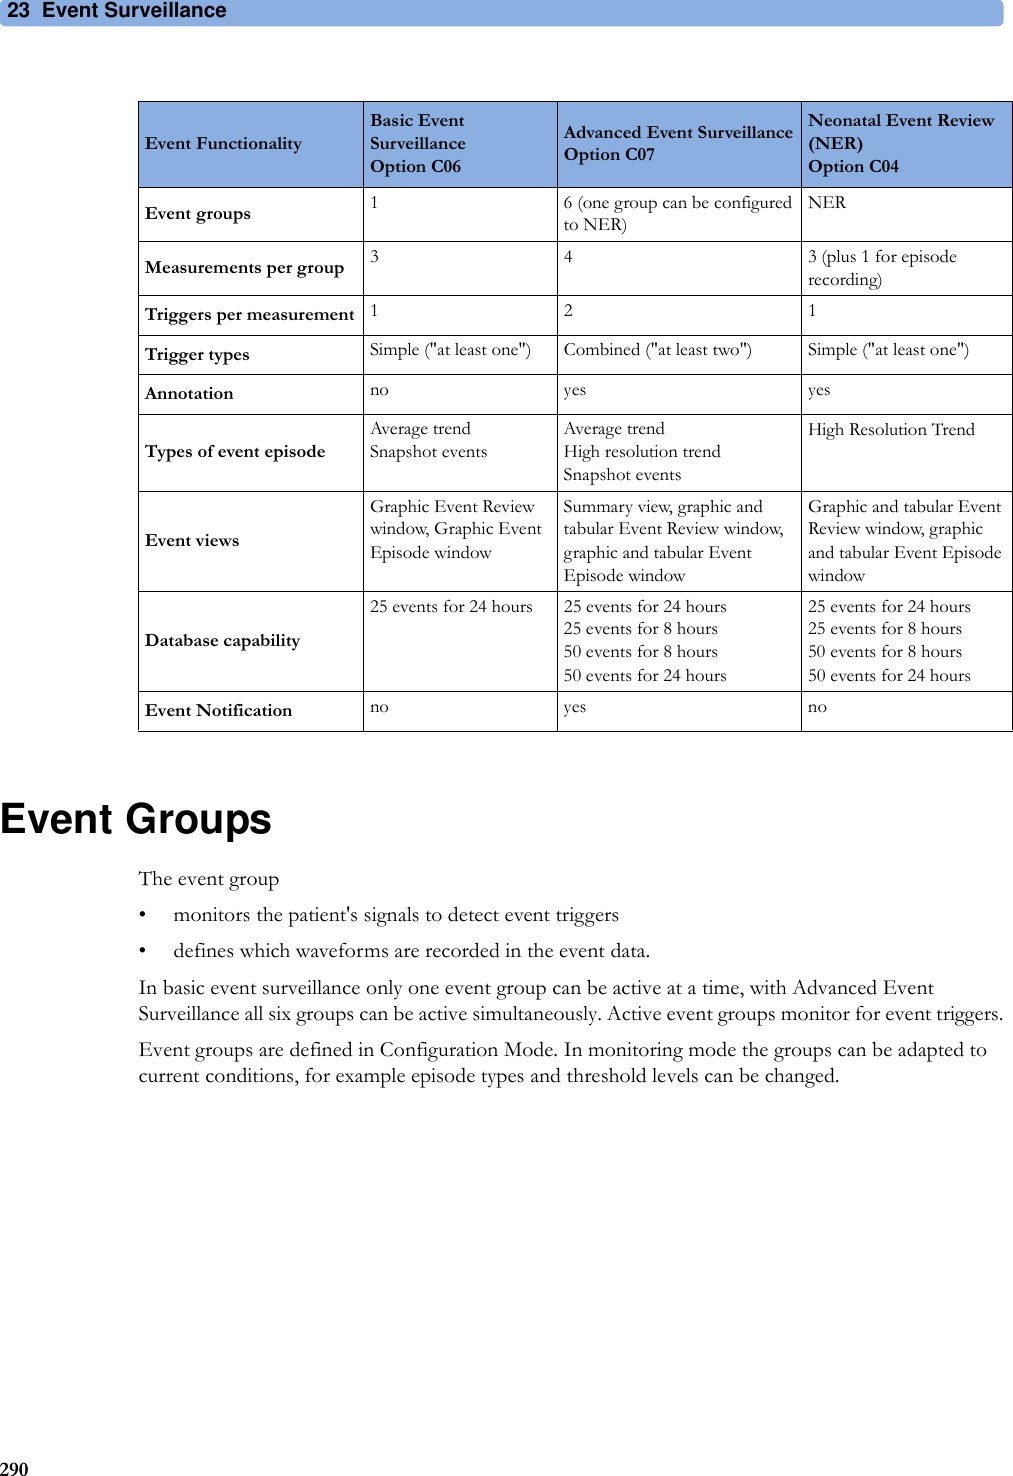 23 Event Surveillance290Event GroupsThe event group• monitors the patient&apos;s signals to detect event triggers• defines which waveforms are recorded in the event data.In basic event surveillance only one event group can be active at a time, with Advanced Event Surveillance all six groups can be active simultaneously. Active event groups monitor for event triggers.Event groups are defined in Configuration Mode. In monitoring mode the groups can be adapted to current conditions, for example episode types and threshold levels can be changed.Event FunctionalityBasic Event Surveillance Option C06Advanced Event SurveillanceOption C07Neonatal Event Review (NER)Option C04Event groups 1 6 (one group can be configured to NER)NERMeasurements per group 3 4 3 (plus 1 for episode recording)Triggers per measurement 12 1Trigger types Simple (&quot;at least one&quot;) Combined (&quot;at least two&quot;) Simple (&quot;at least one&quot;)Annotation no yes yesTypes of event episodeAverage trendSnapshot eventsAverage trendHigh resolution trendSnapshot eventsHigh Resolution TrendEvent viewsGraphic Event Review window, Graphic Event Episode windowSummary view, graphic and tabular Event Review window, graphic and tabular Event Episode windowGraphic and tabular Event Review window, graphic and tabular Event Episode windowDatabase capability25 events for 24 hours 25 events for 24 hours25 events for 8 hours50 events for 8 hours 50 events for 24 hours25 events for 24 hours25 events for 8 hours50 events for 8 hours 50 events for 24 hoursEvent Notification no yes no